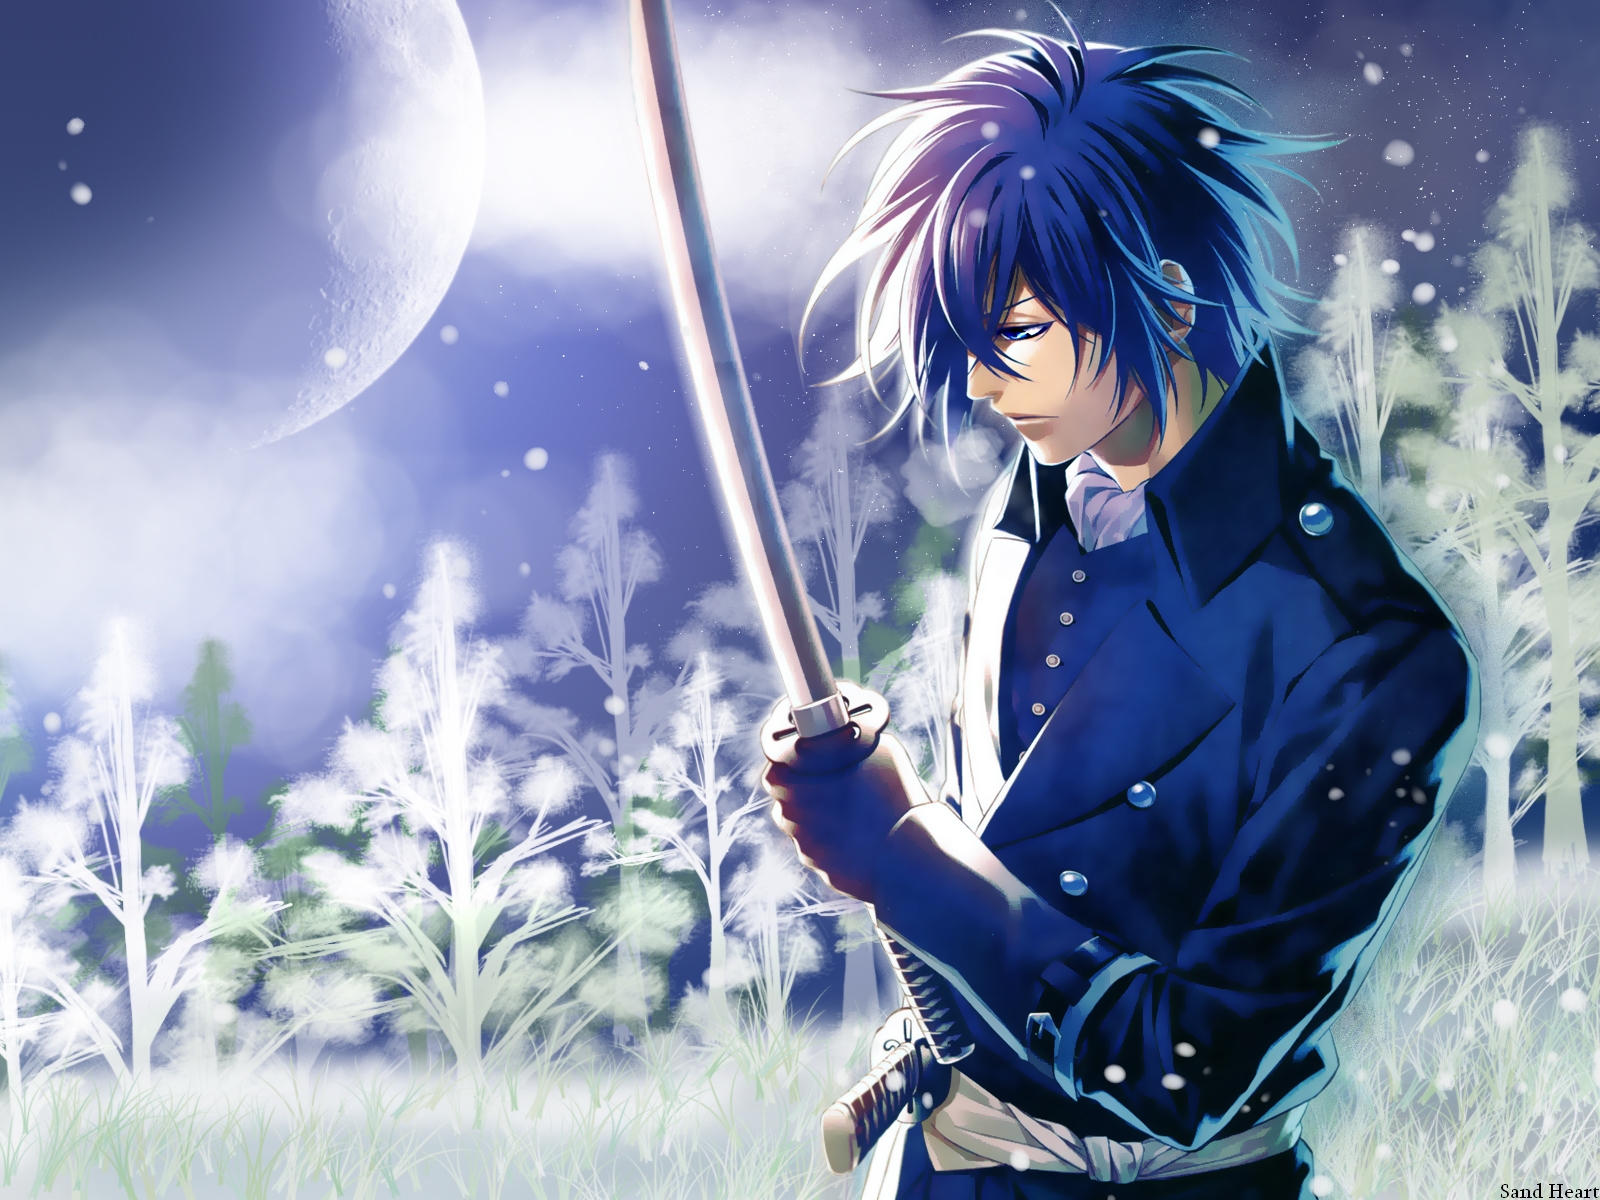 Anime Guy With Blue Hair And Sword 8733